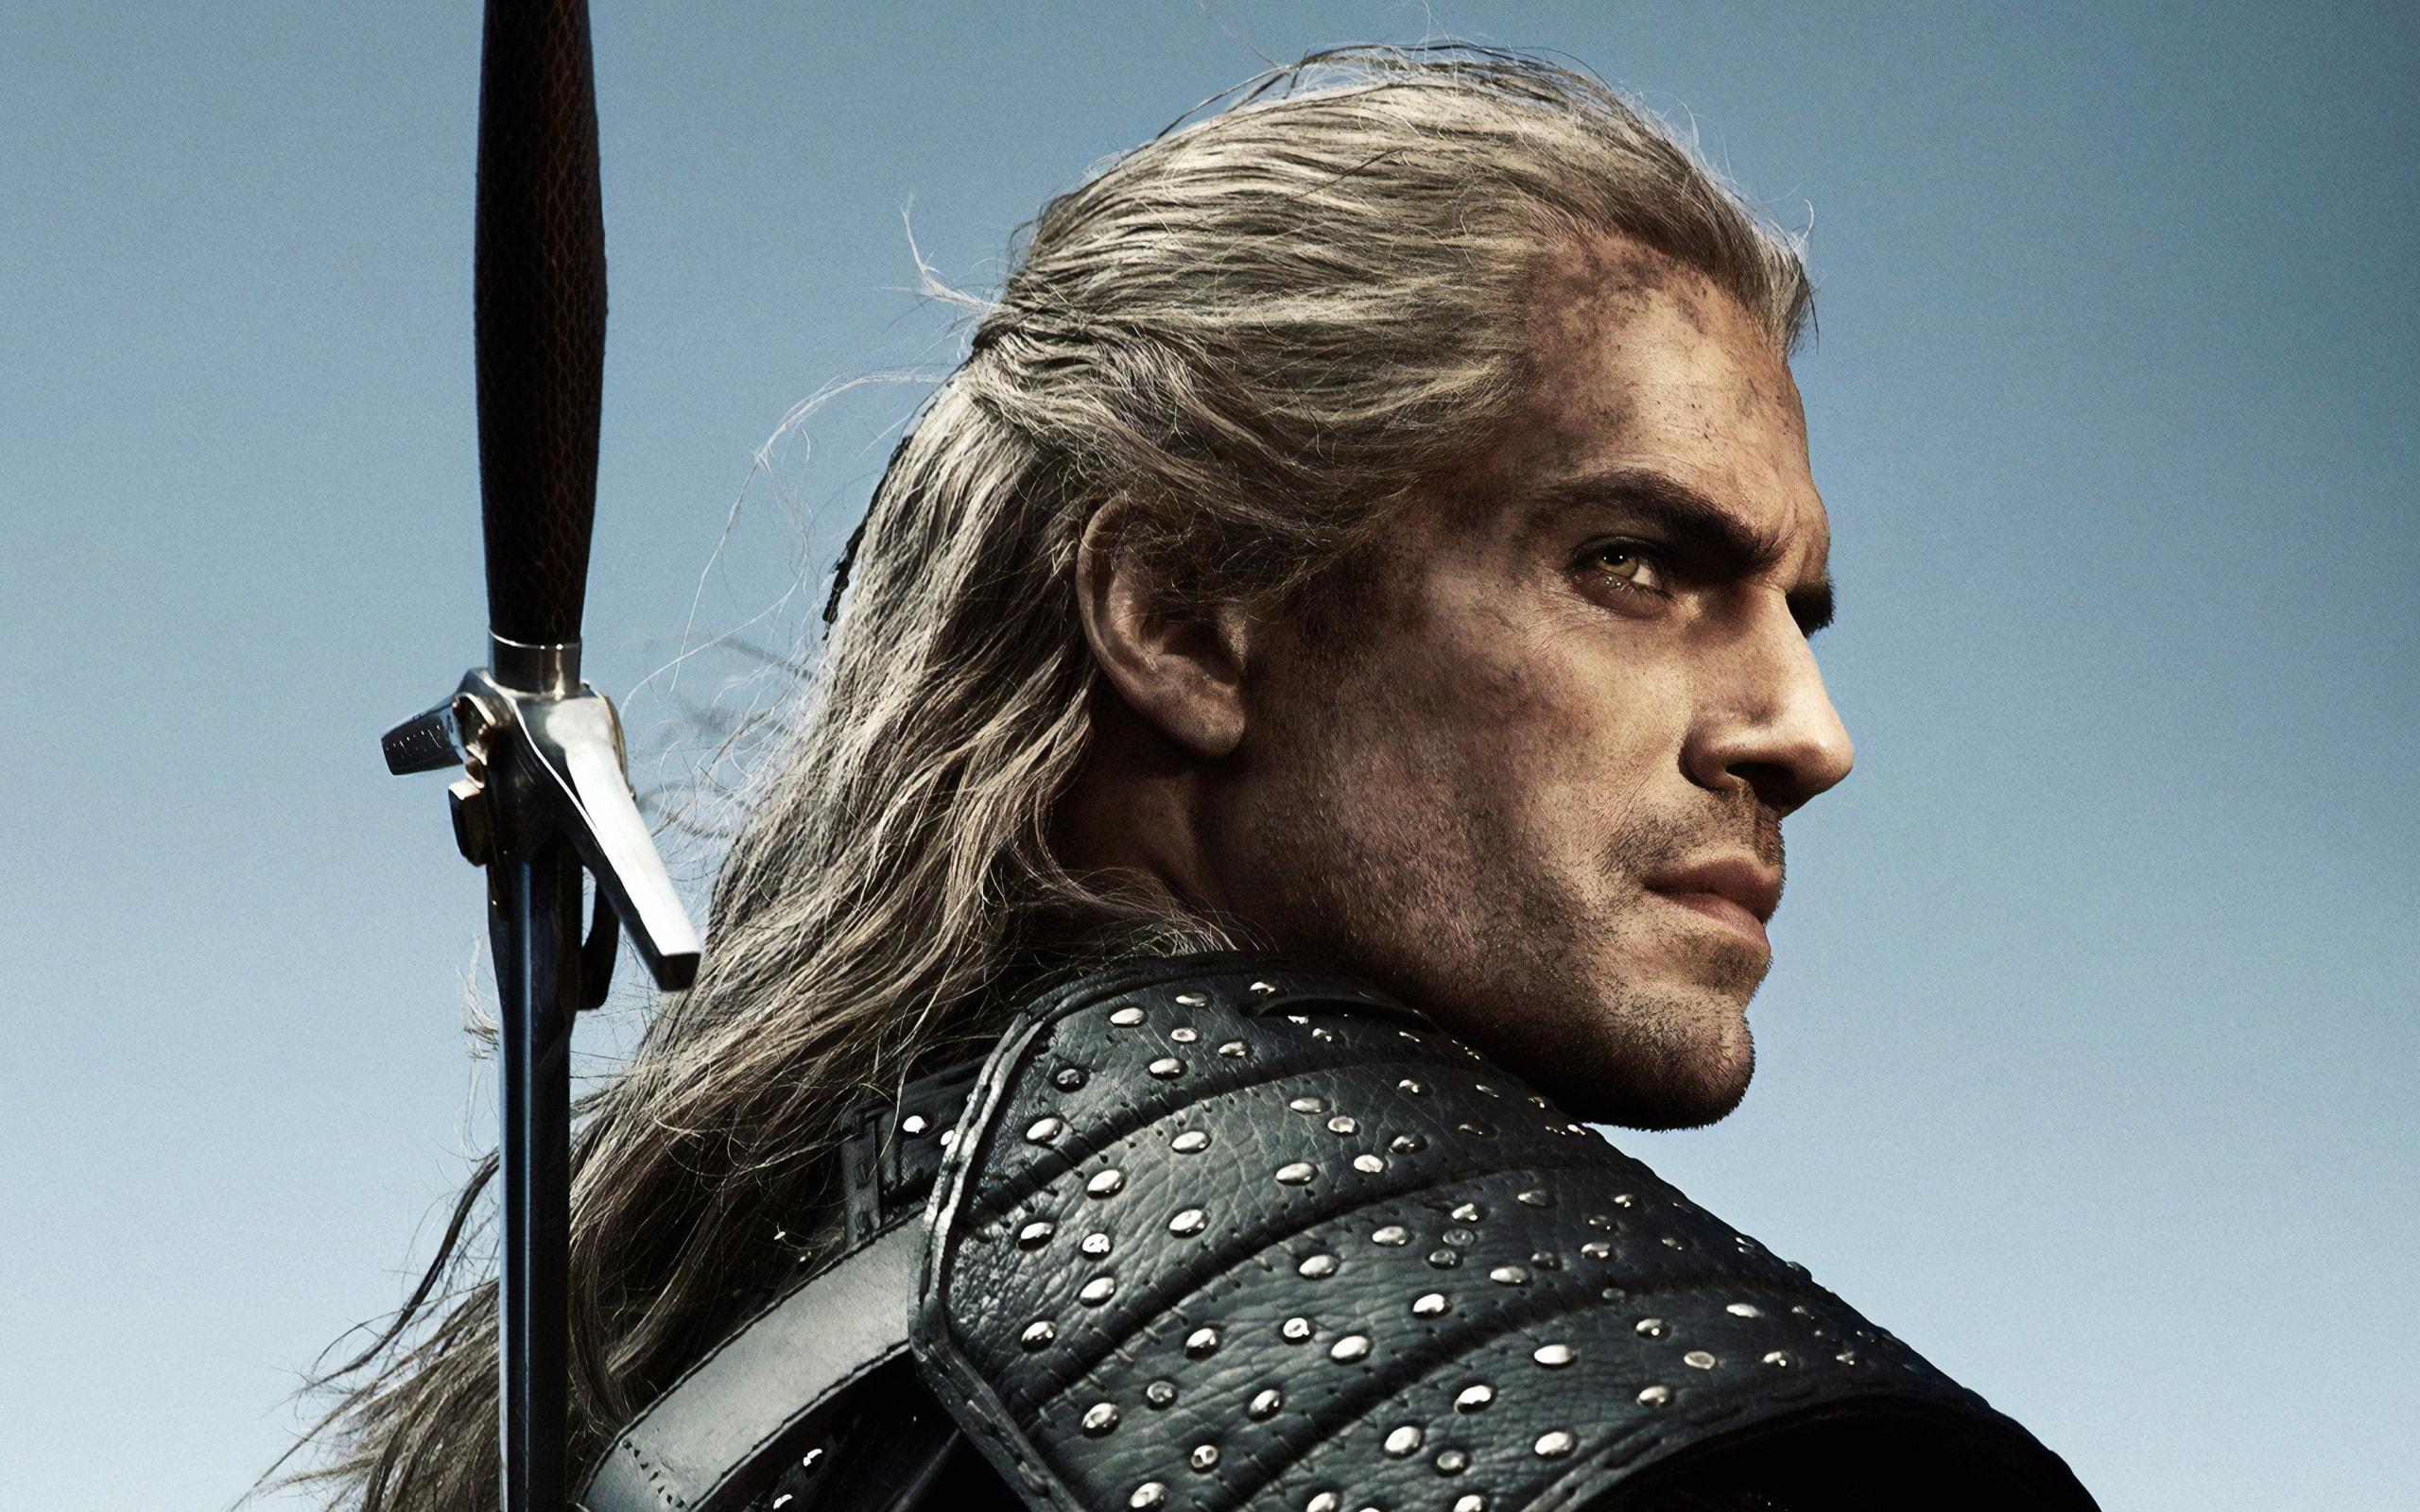 Wallpapers of Henry Cavill, The Witcher, TV Show backgrounds & HD image